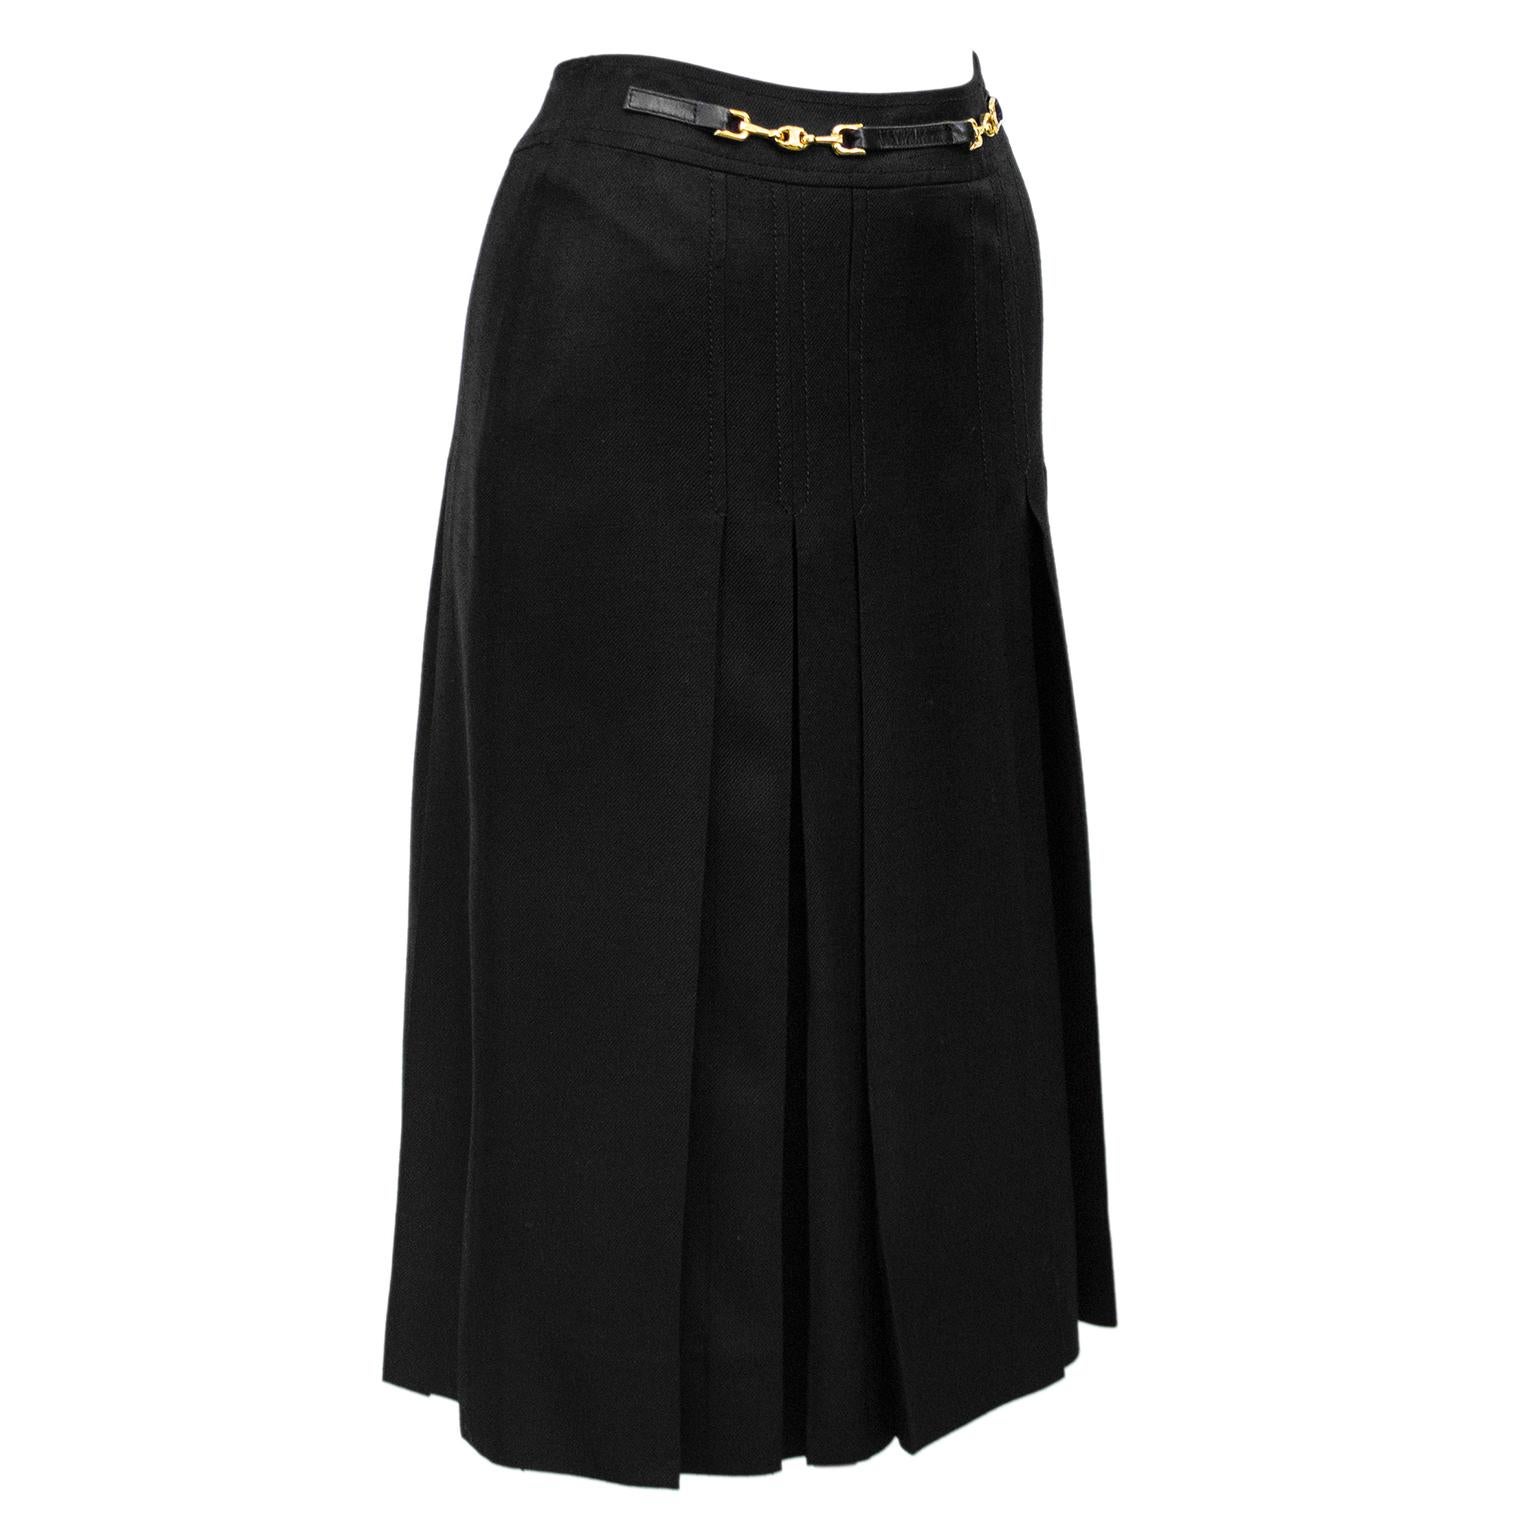 1970's classic Celine black viscose and silk skirt with half black leather and gold belt at waistband. Inverted stitched pleats on the front and back. Overall A line shape. In excellent condition, side zipper with hook and eye. Fits like a US size